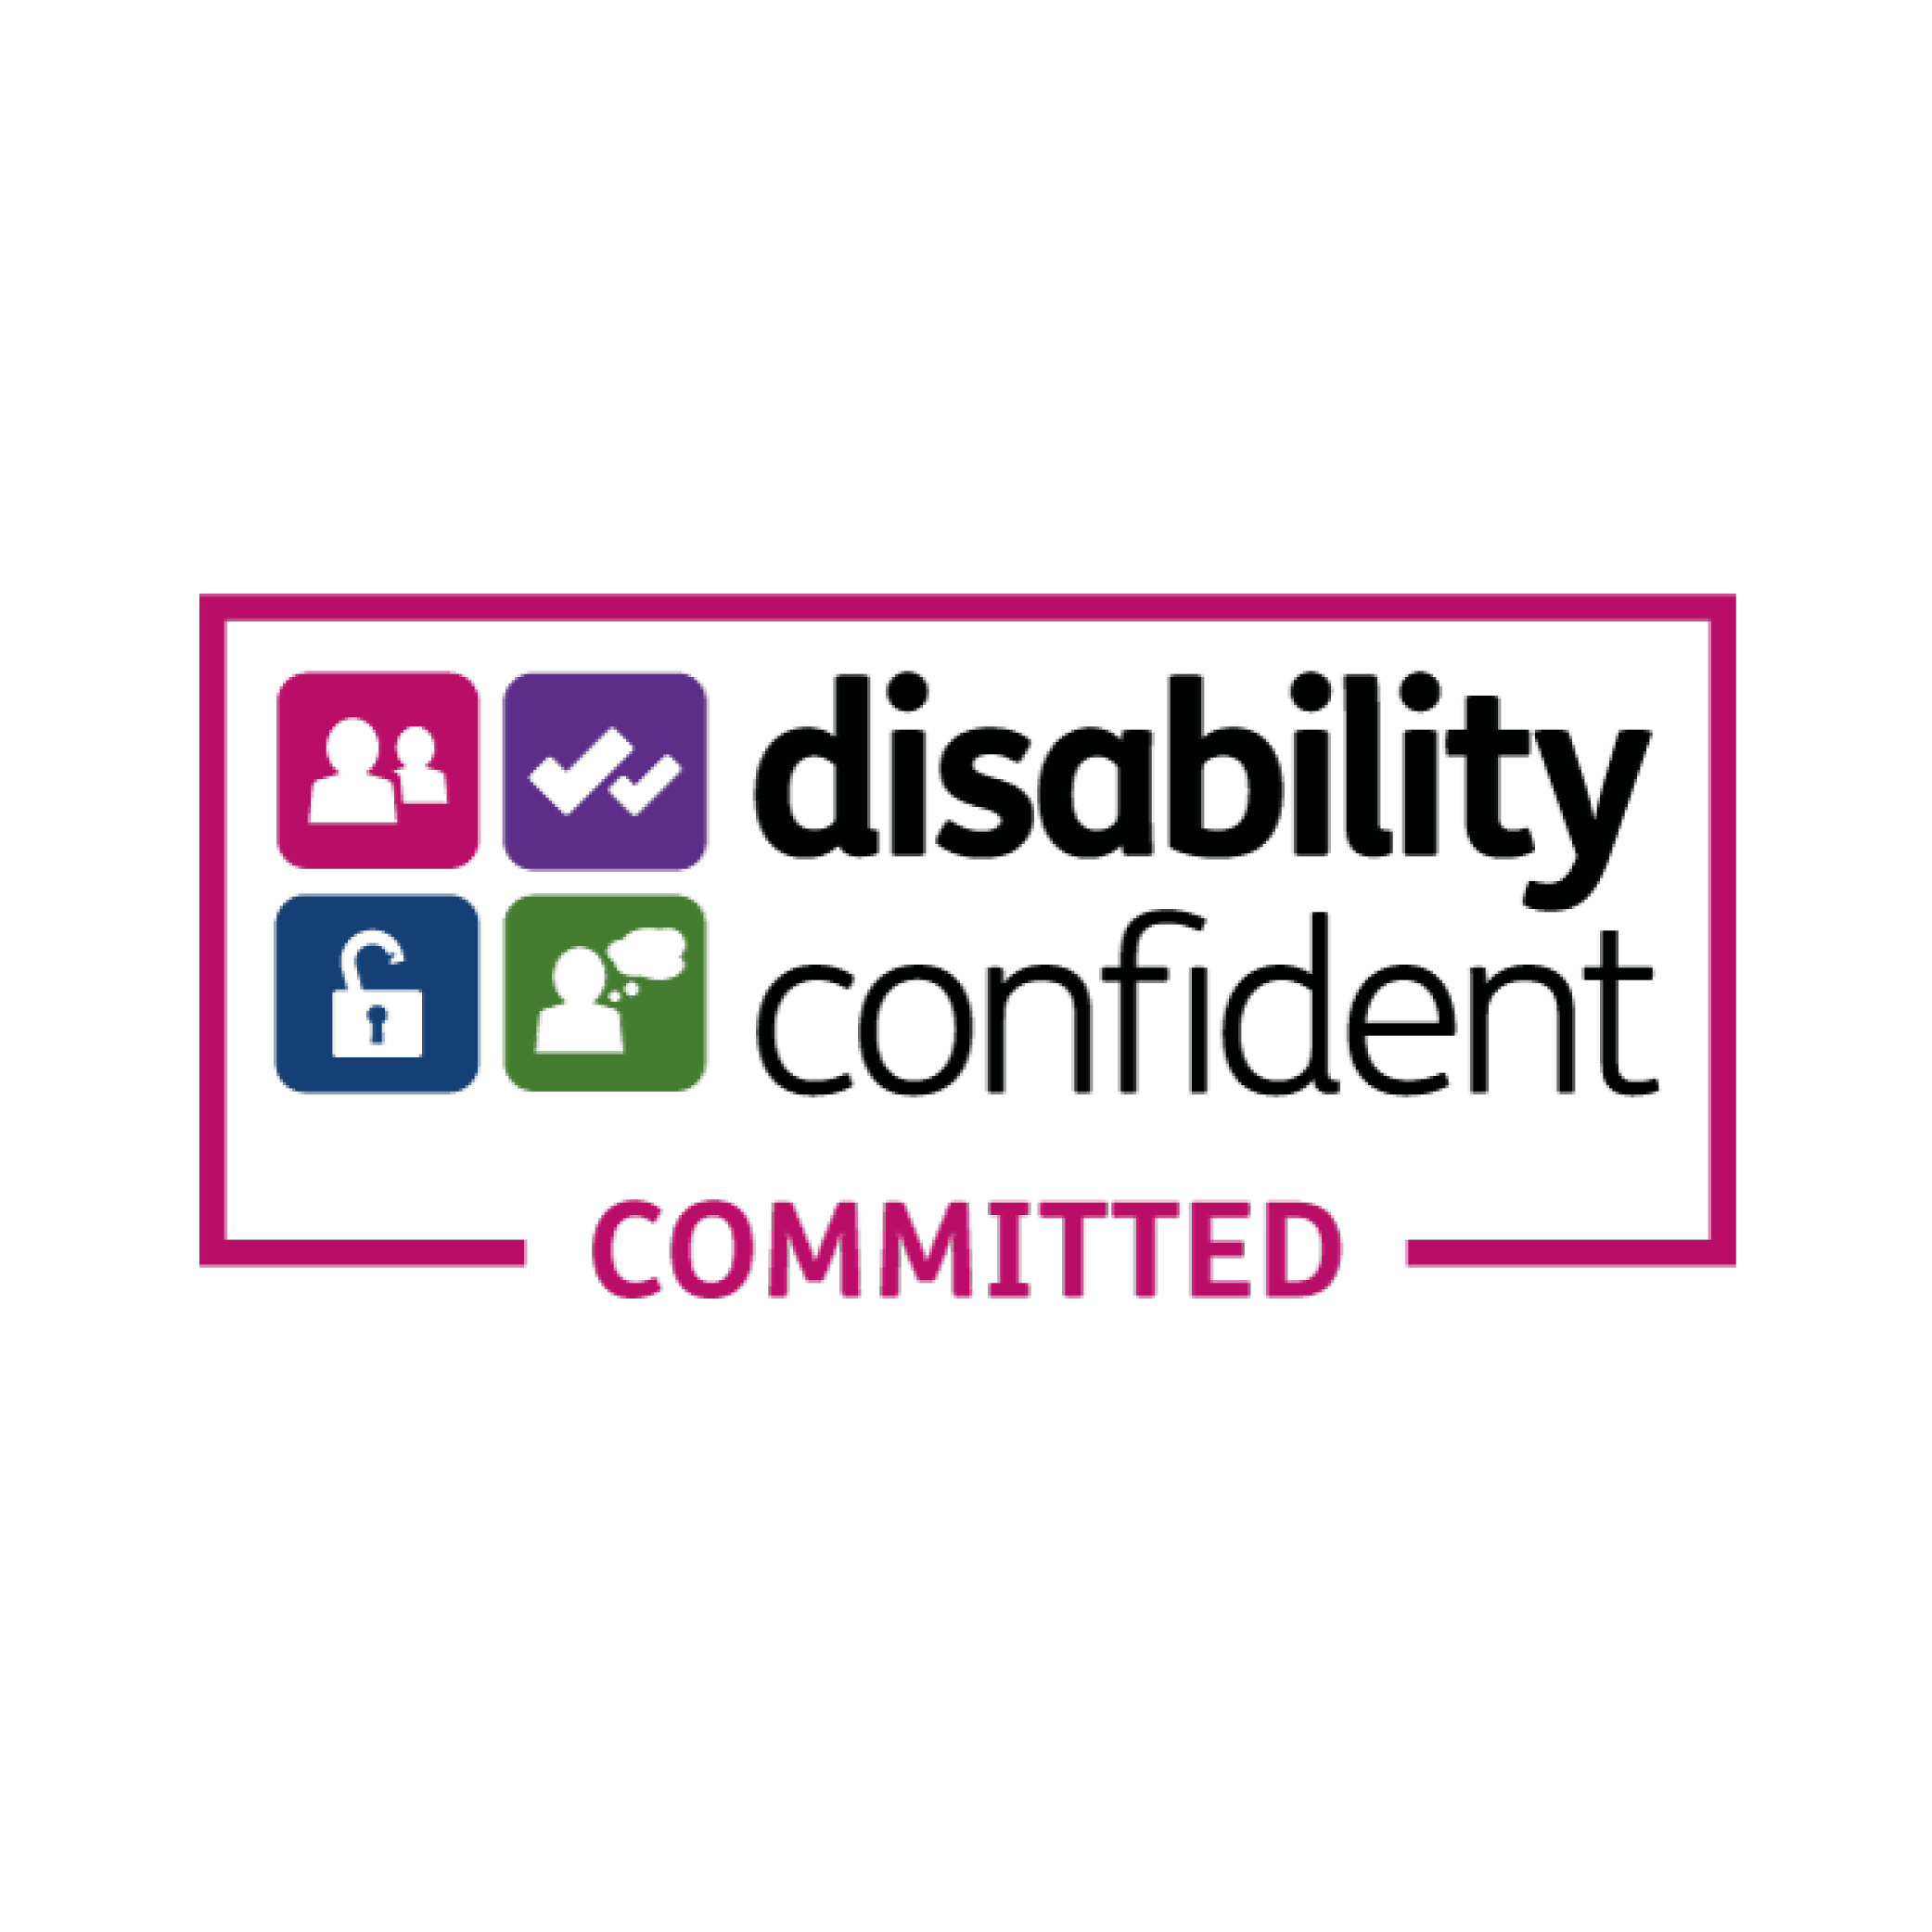 disability leader confident image